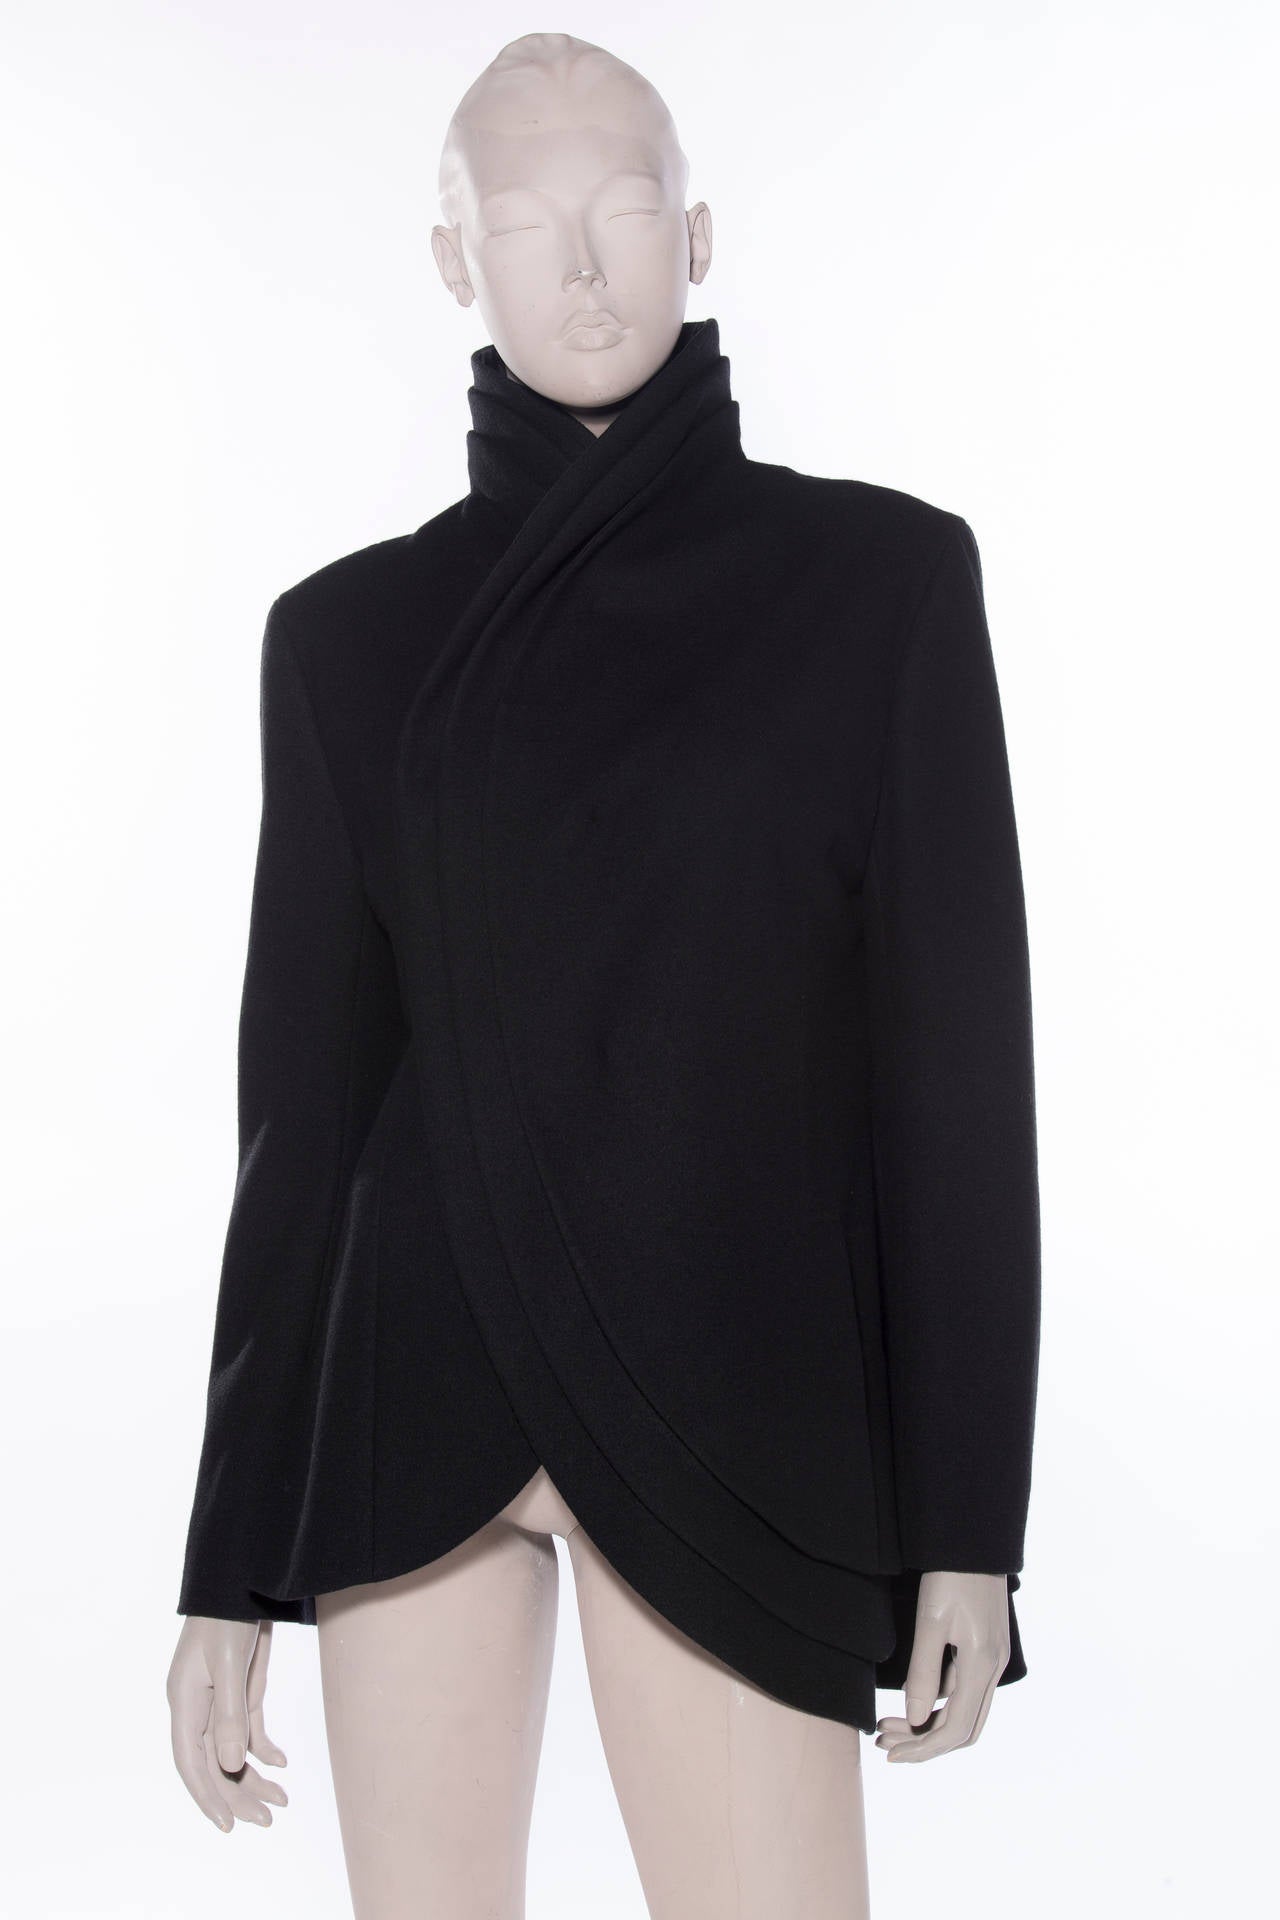 Yohji Yamamoto, circa 1980s, black wool jacket with stand collar, tiered edges, front welt pocket at waist and front concealed snap closure.

Bust 40”, Waist 37”, Shoulder 17”, Length 31.5”
Fabric Content: 90% Wool, 10% Nylon; Lining: 100% Cupro